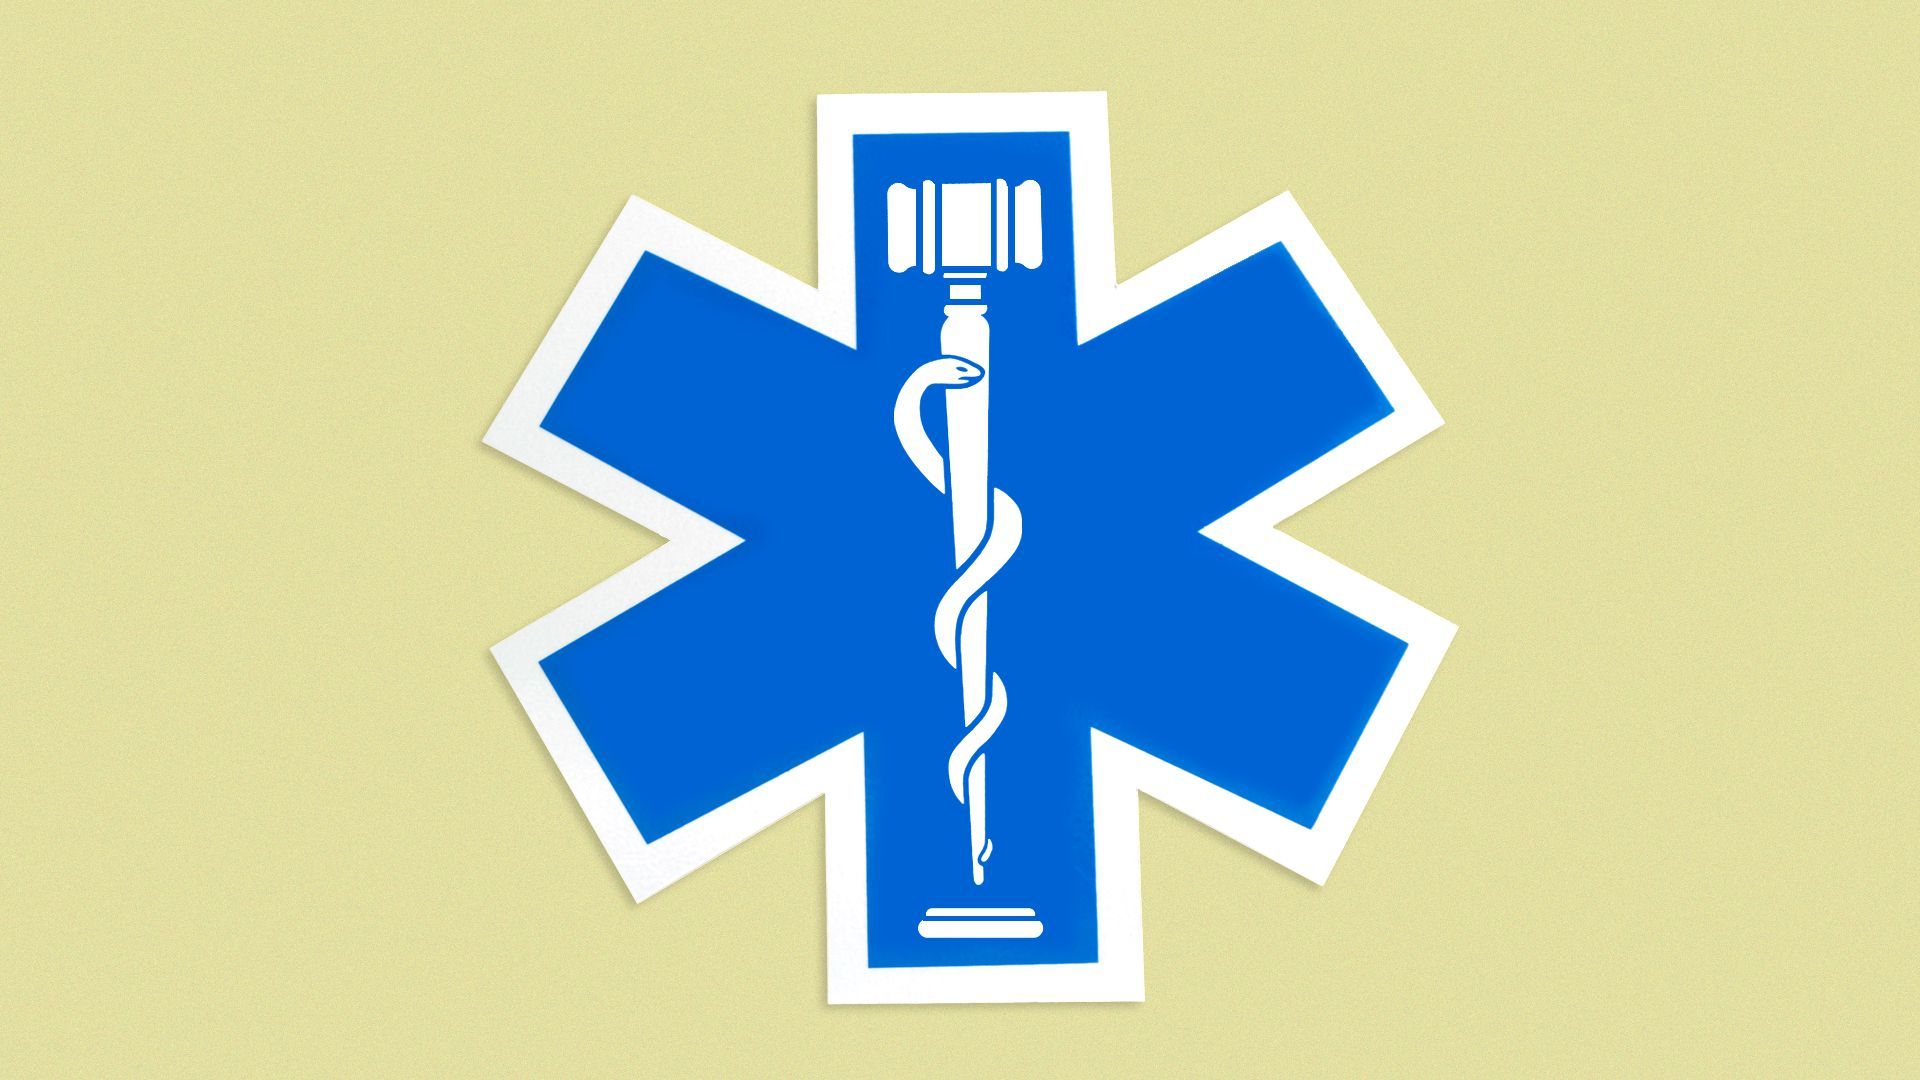 Illustration of the star of life symbol with a gavel.